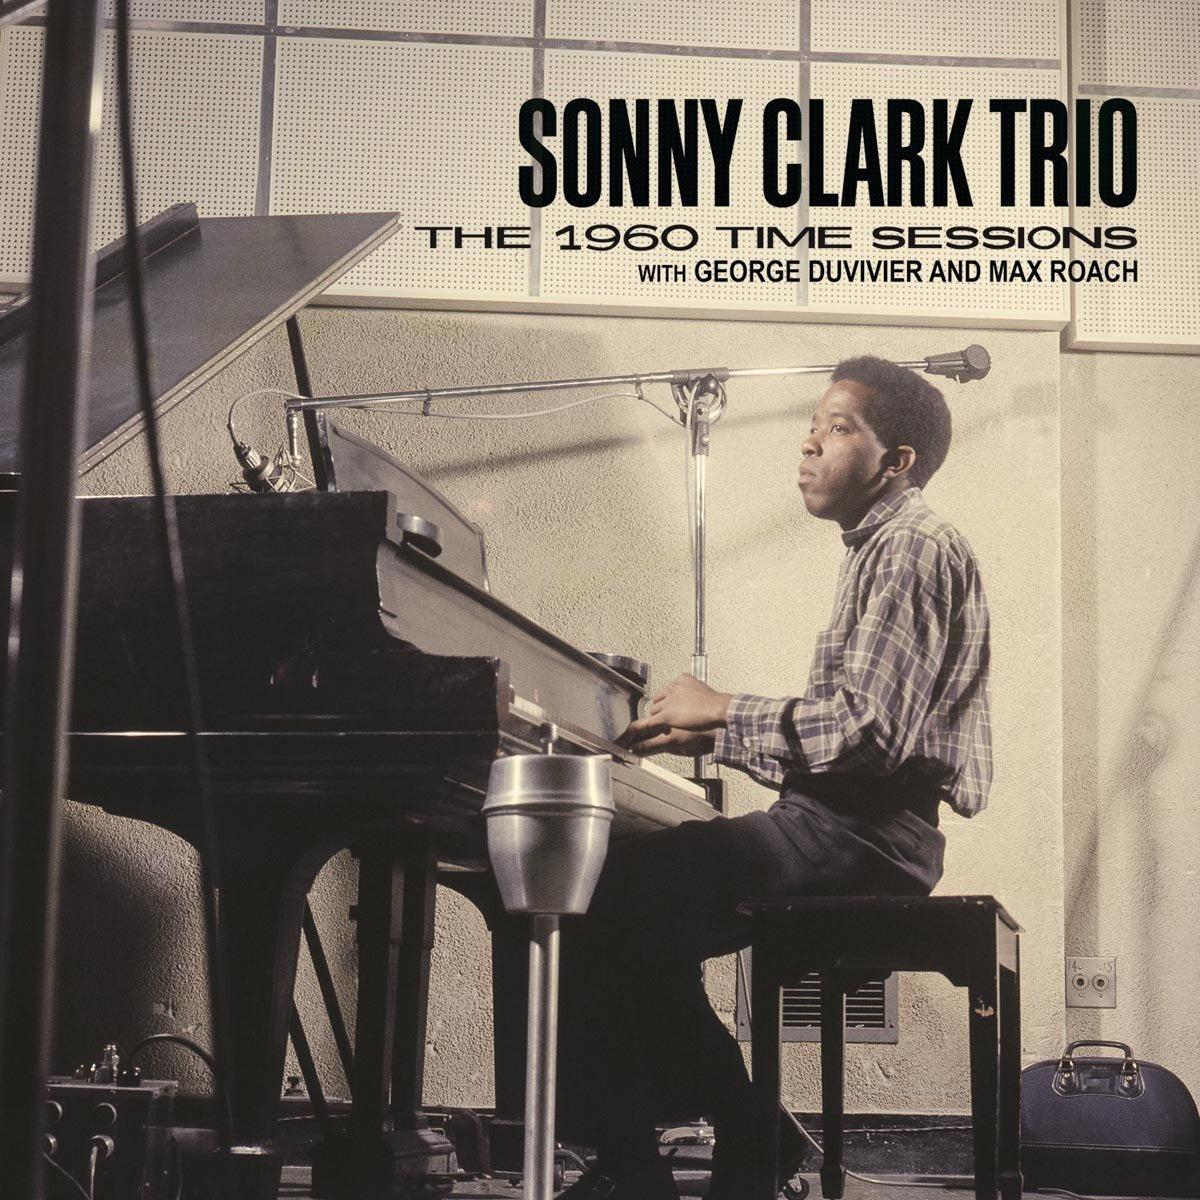 Sonny Clark Trio - The 1960 Time Sessions